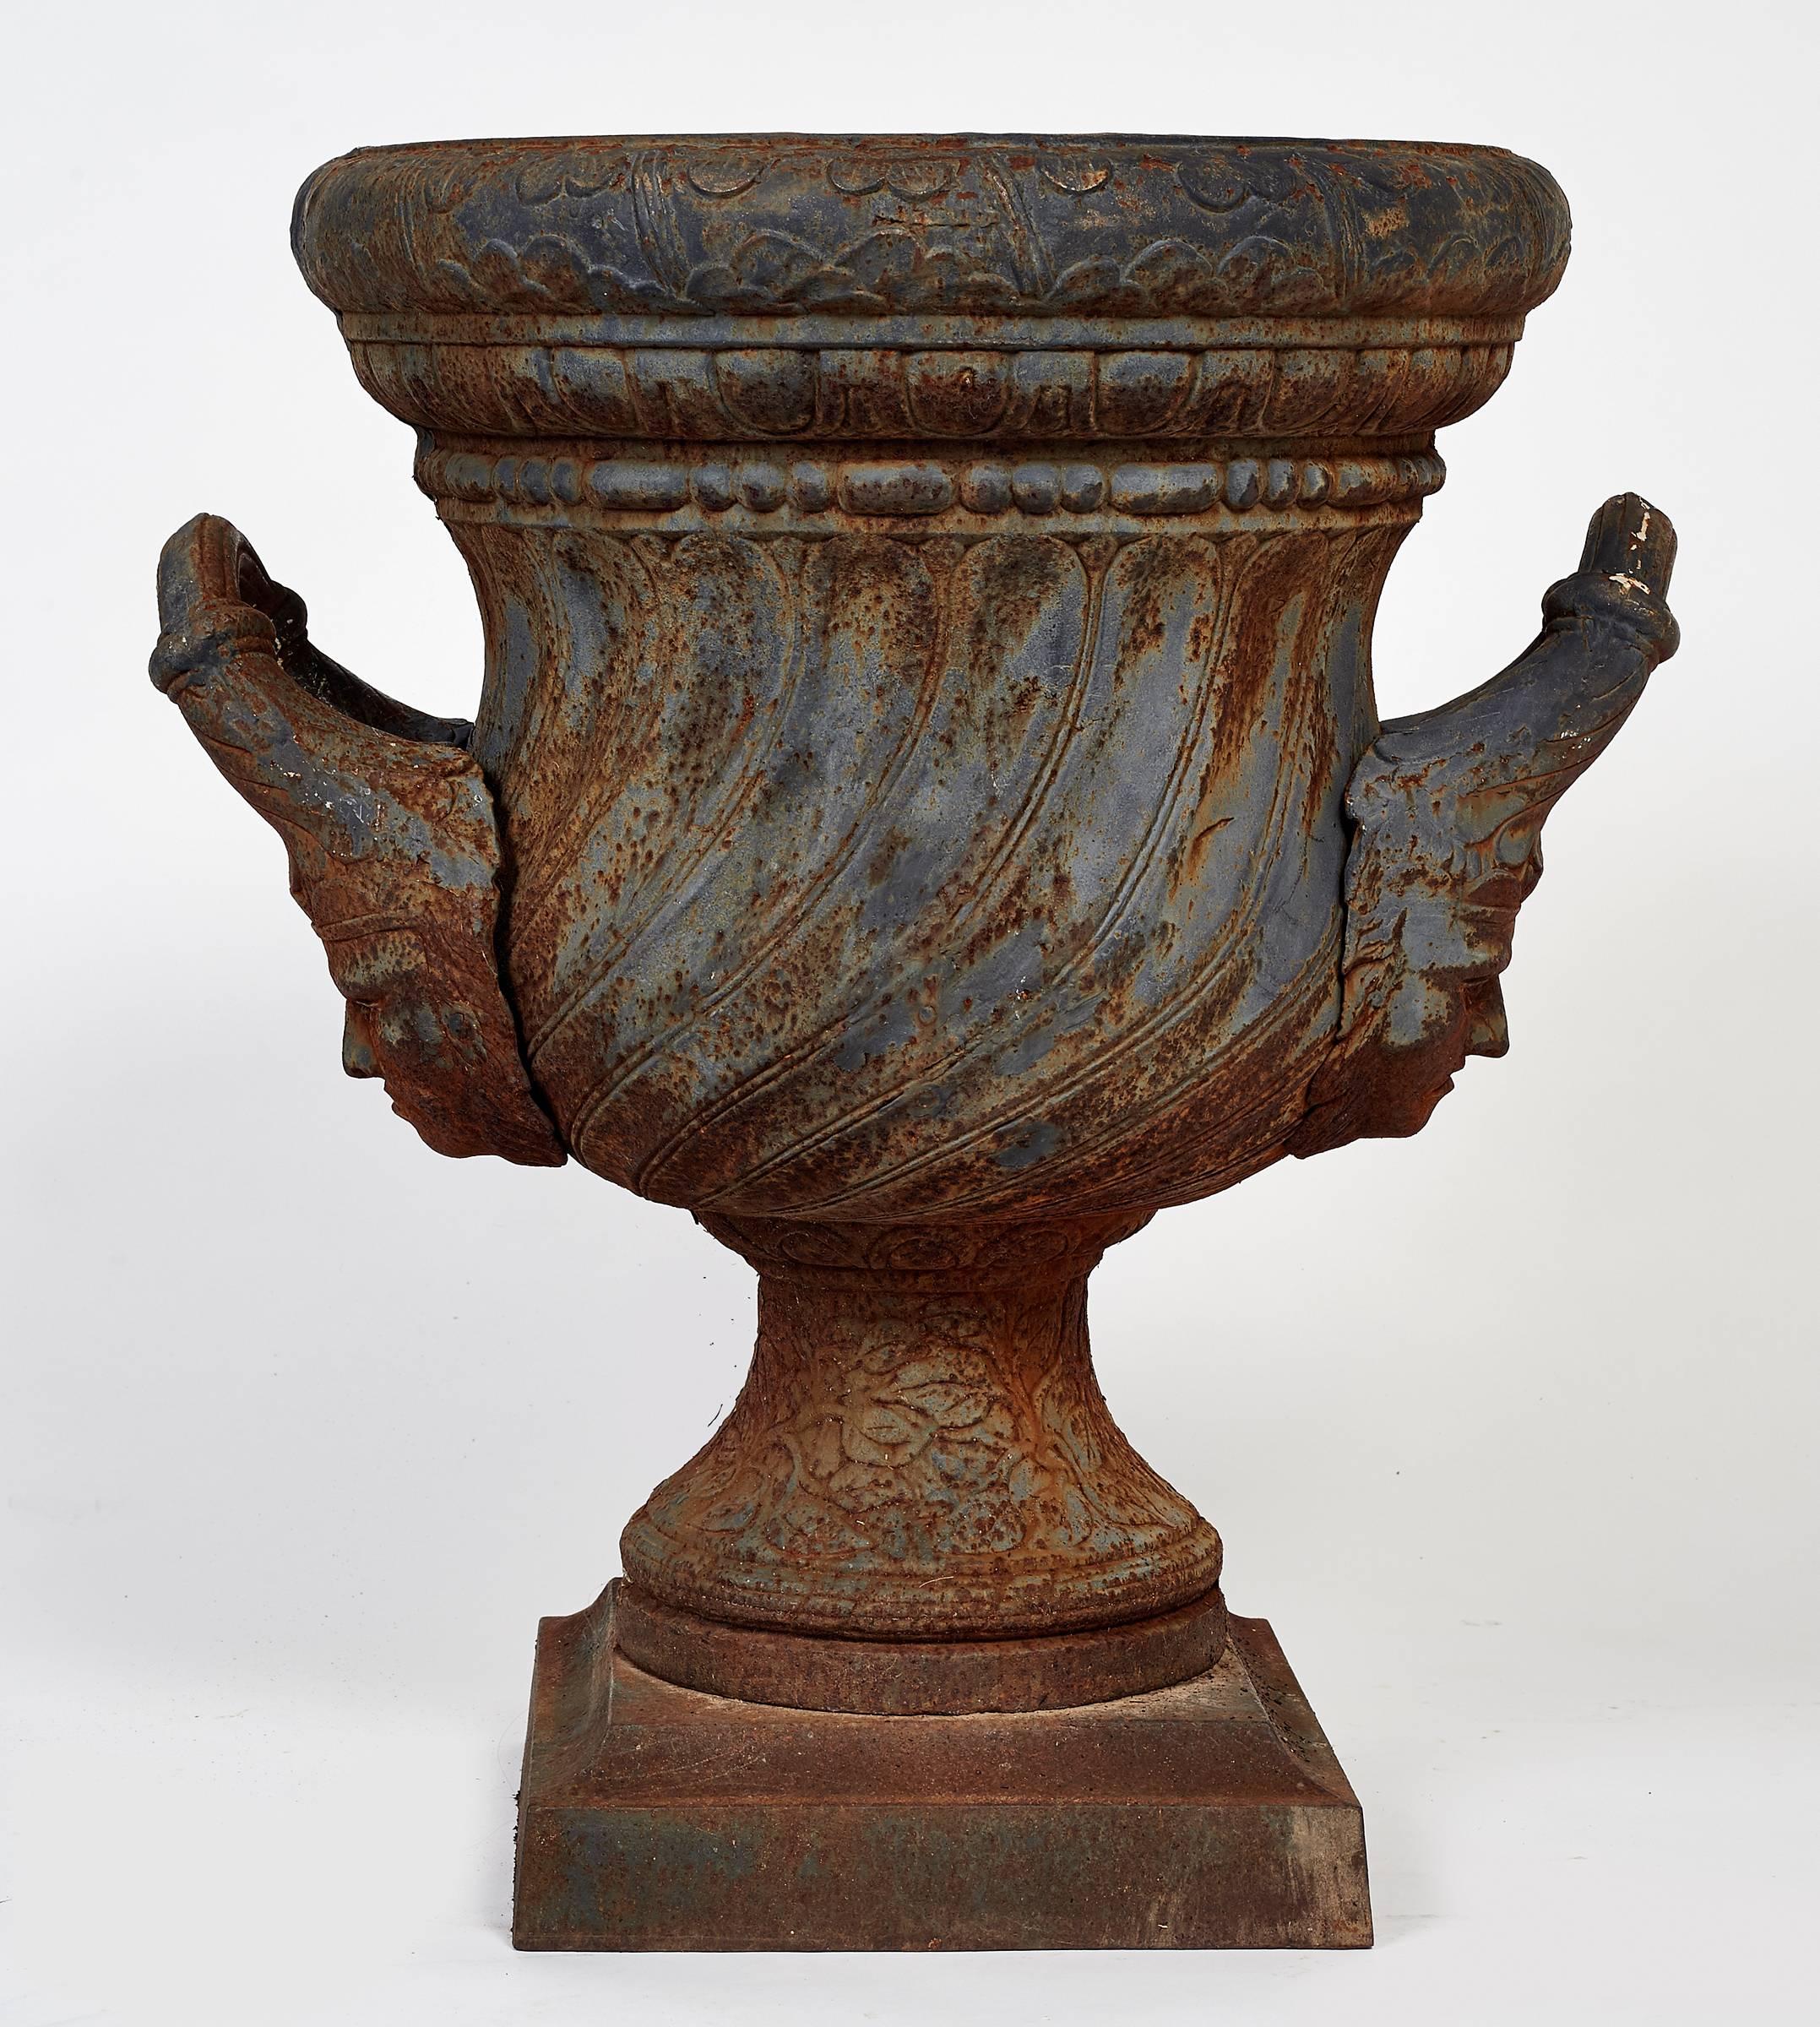 You are viewing a striking pair of Indian faced Garden Urns. Acquired from a sprawling Connecticut estate. They are in fantastic condition with no dents. They have this wonderful patina that has age so well. Please take of the details in the faces